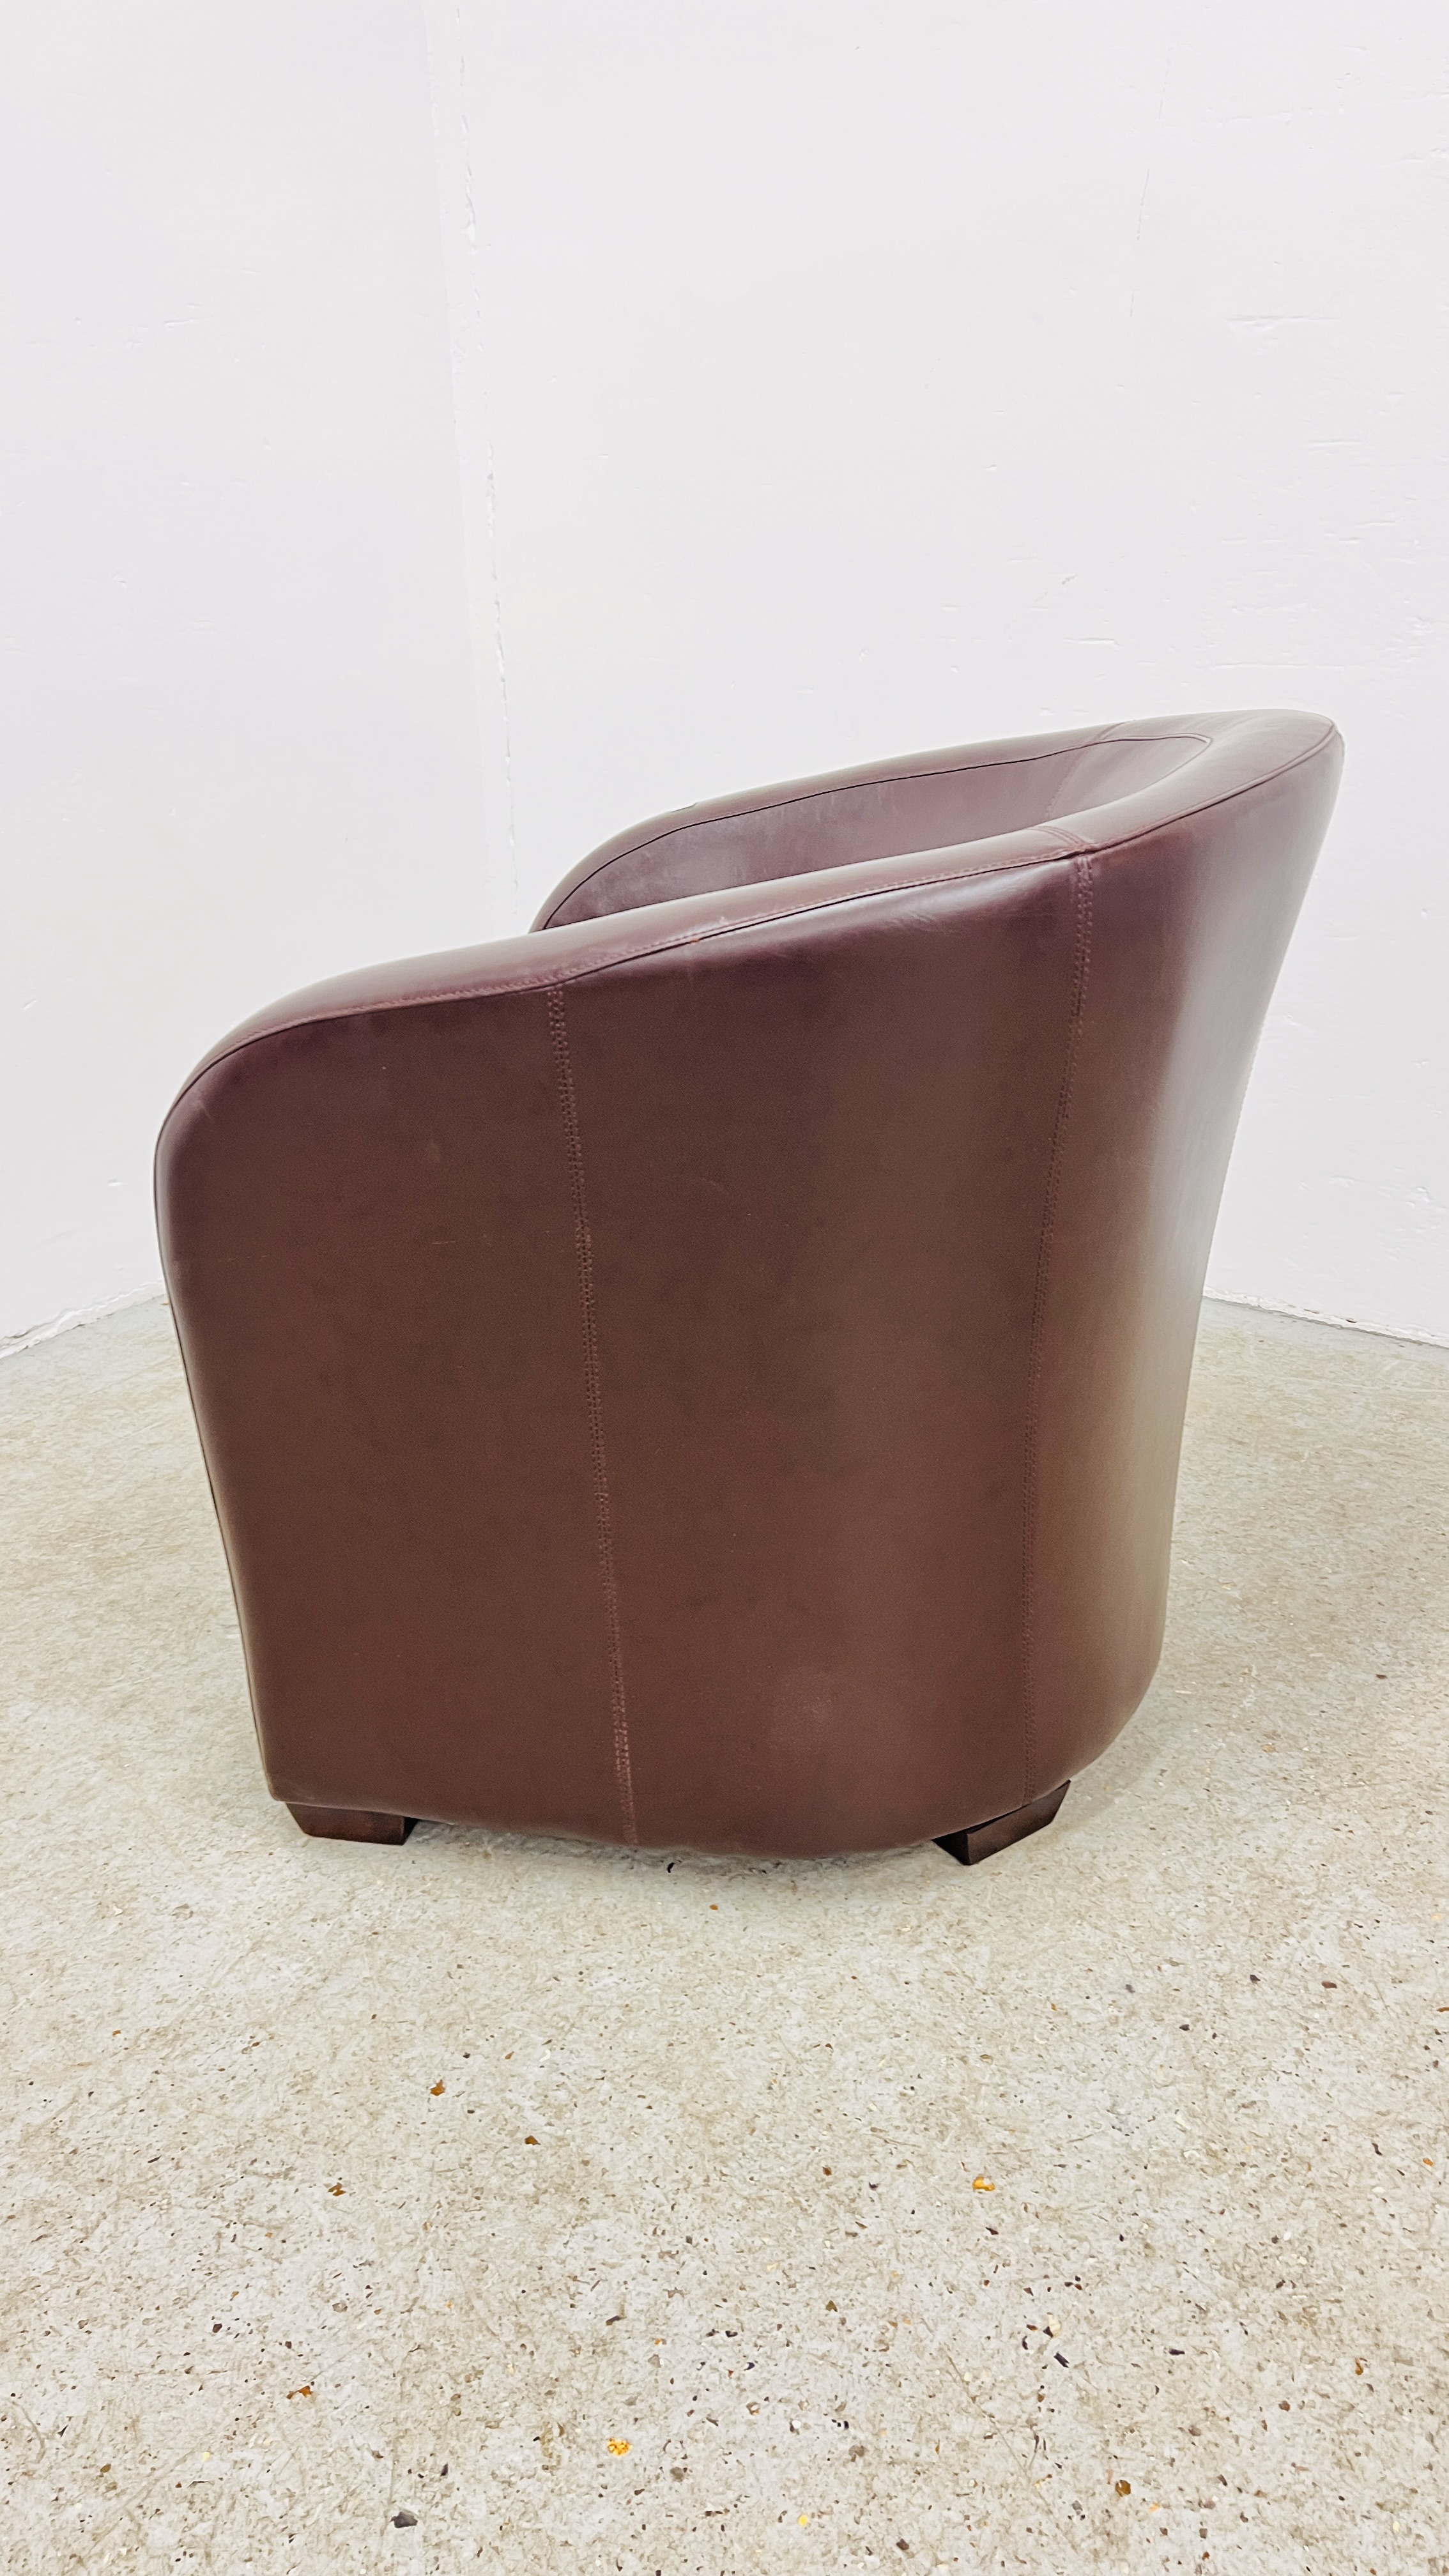 A MODERN BROWN FAUX LEATHER TUB CHAIR. - Image 5 of 5